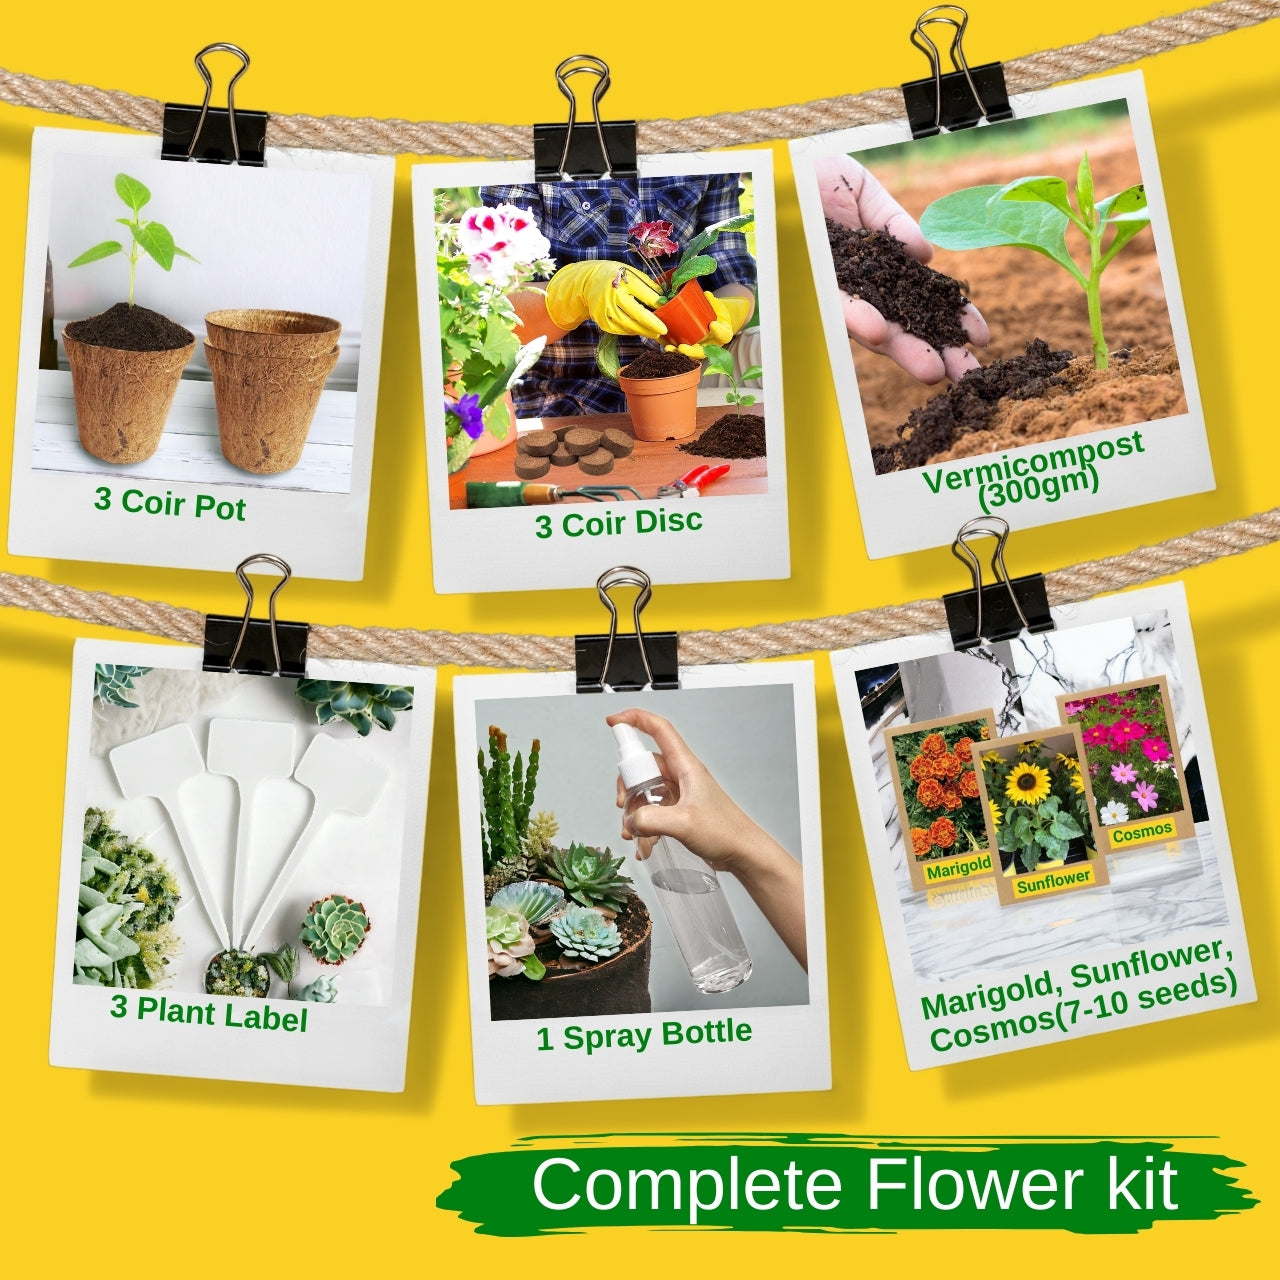 3 in 1 DIY Growkit for Marigold, Sunflower and Cosmos Mix